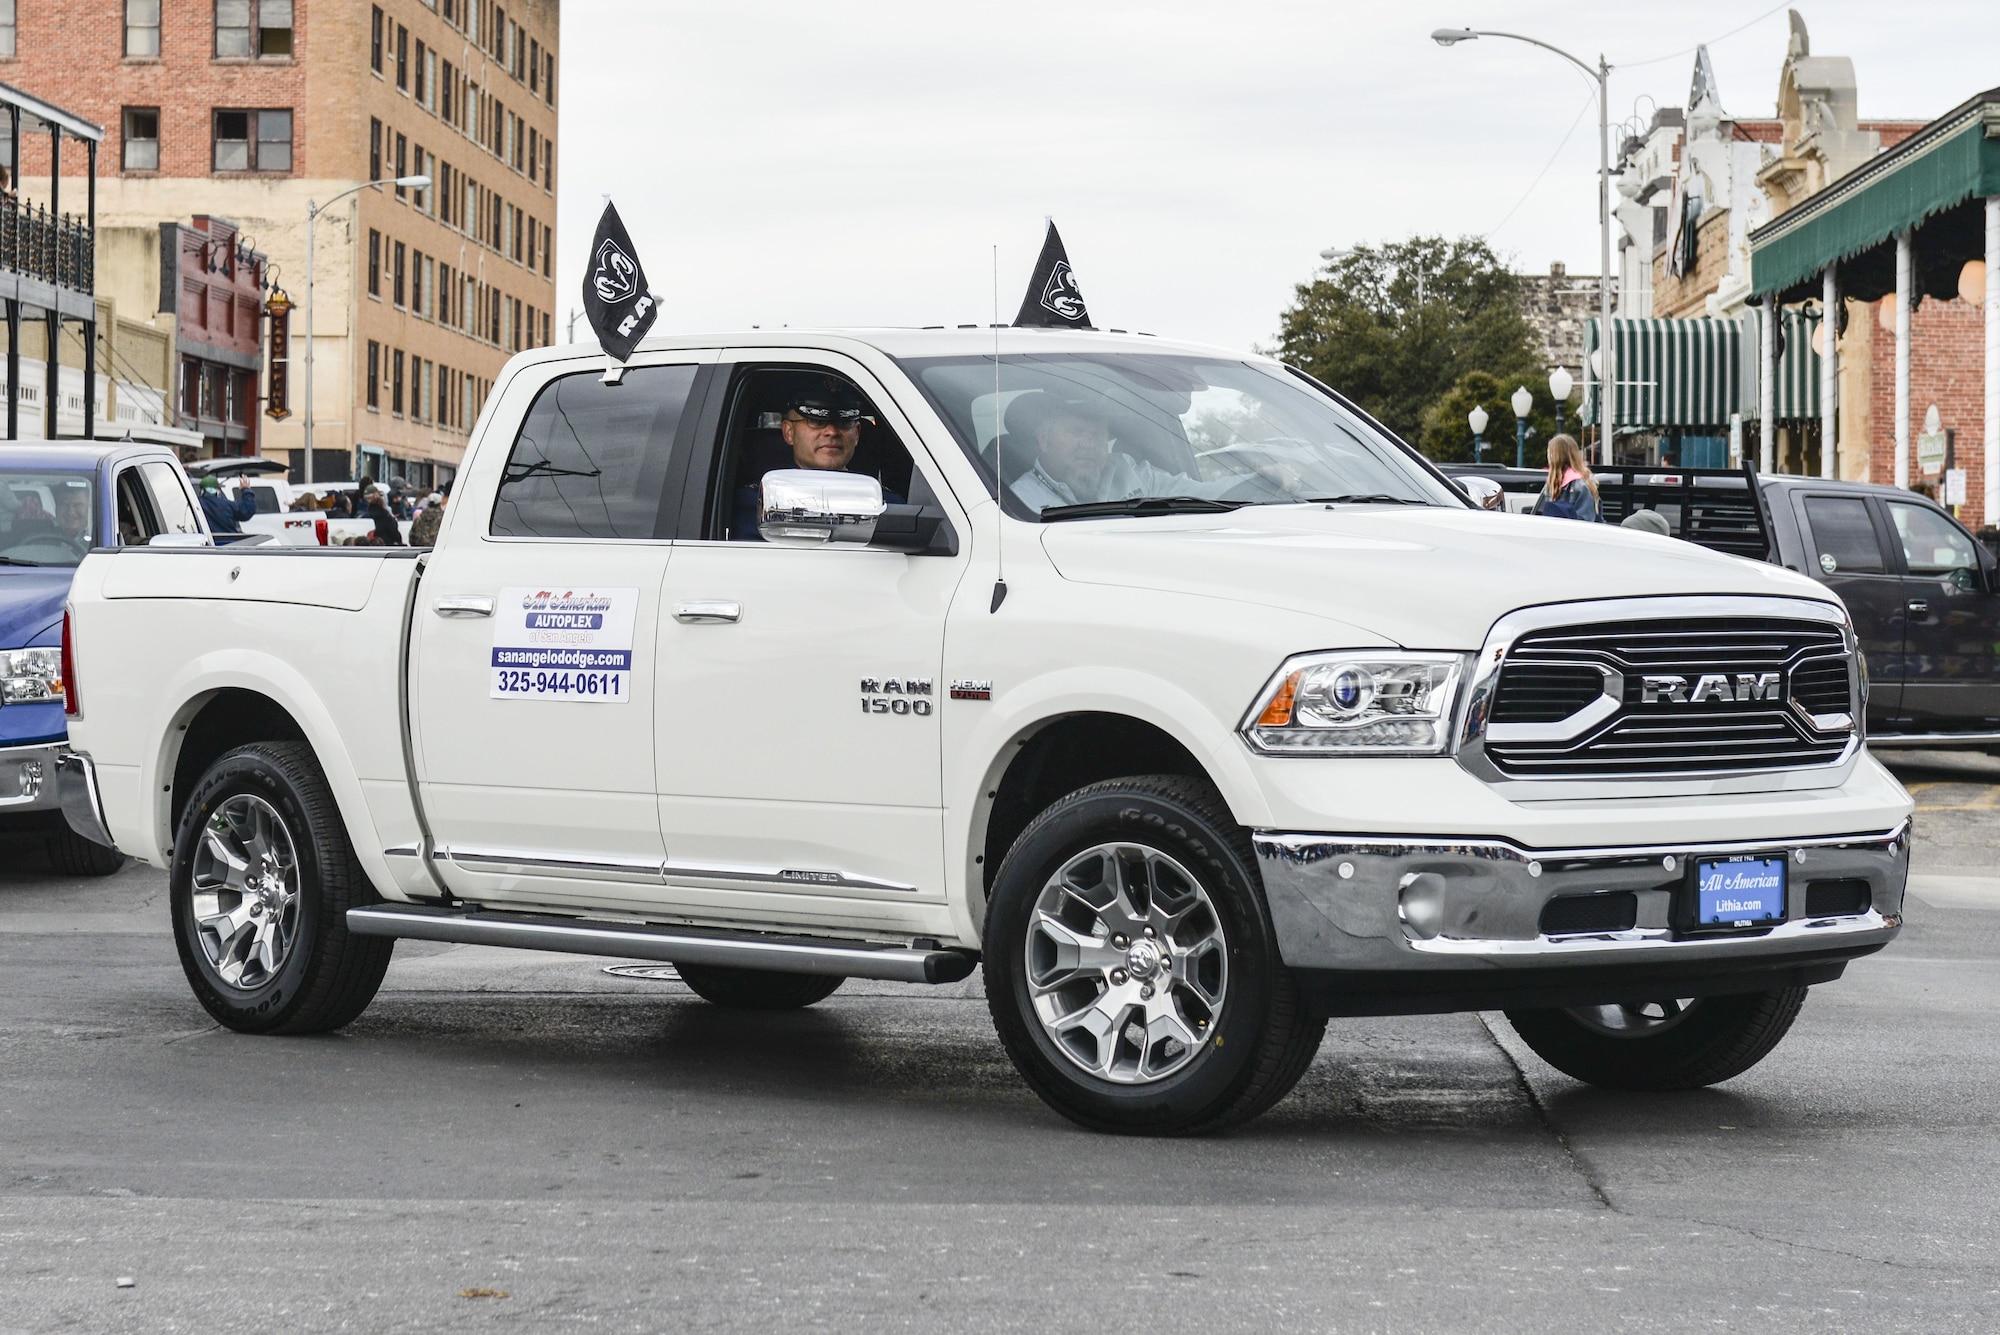 U.S. Air Force Col. Alejandro Ganster, 17th Training Group commander, participates in the rodeo parade in downtown San Angelo, Texas, Feb. 3, 2018. The rodeo parade was the official kickoff of the San Angelo Stock Show and Rodeo. (U.S. Air Force photo by Aryn Lockhart/Released)